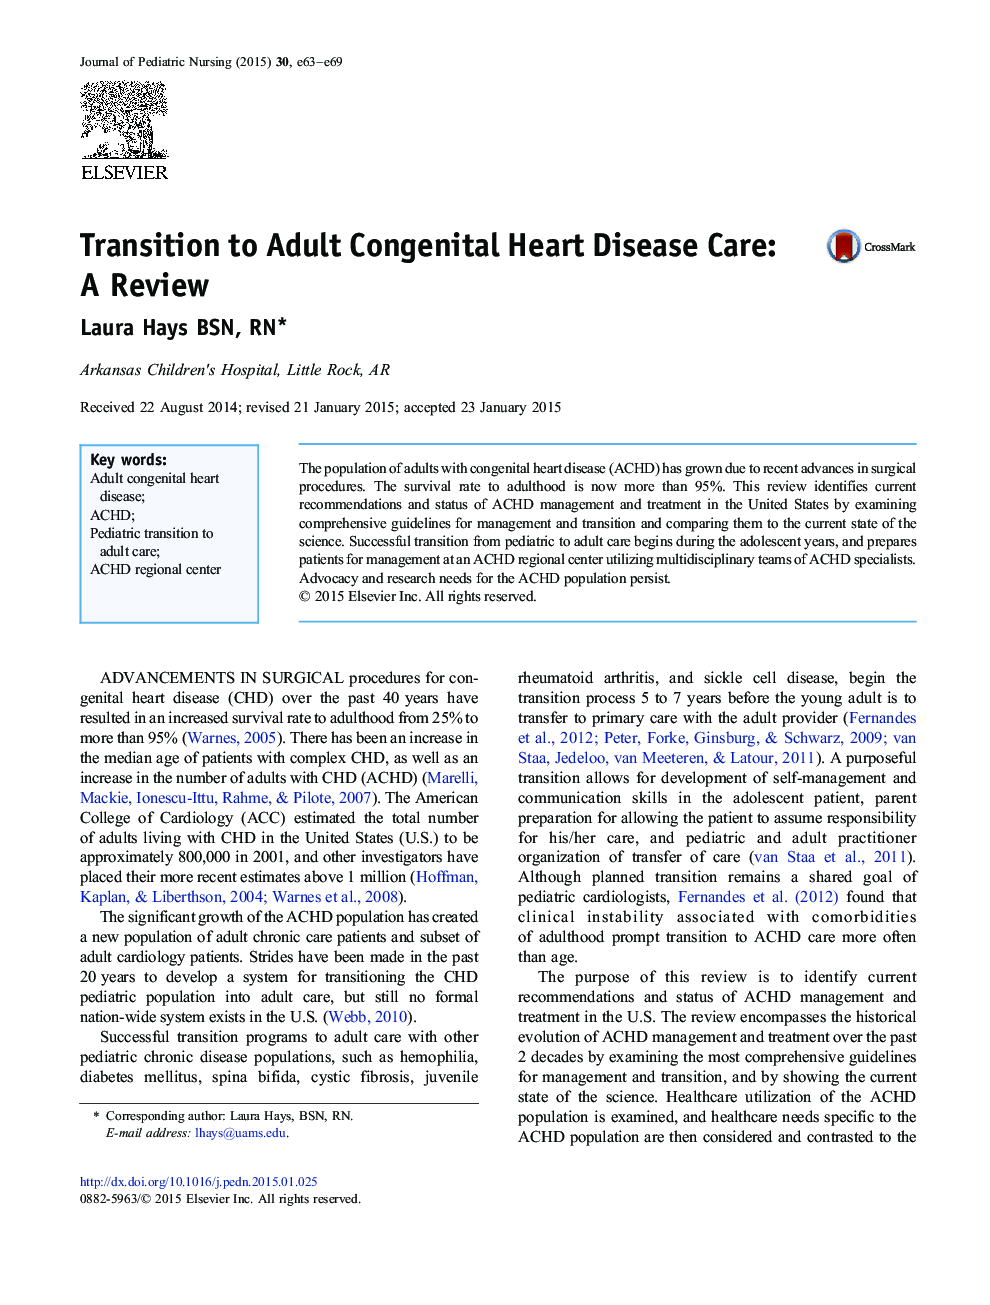 Transition to Adult Congenital Heart Disease Care: A Review